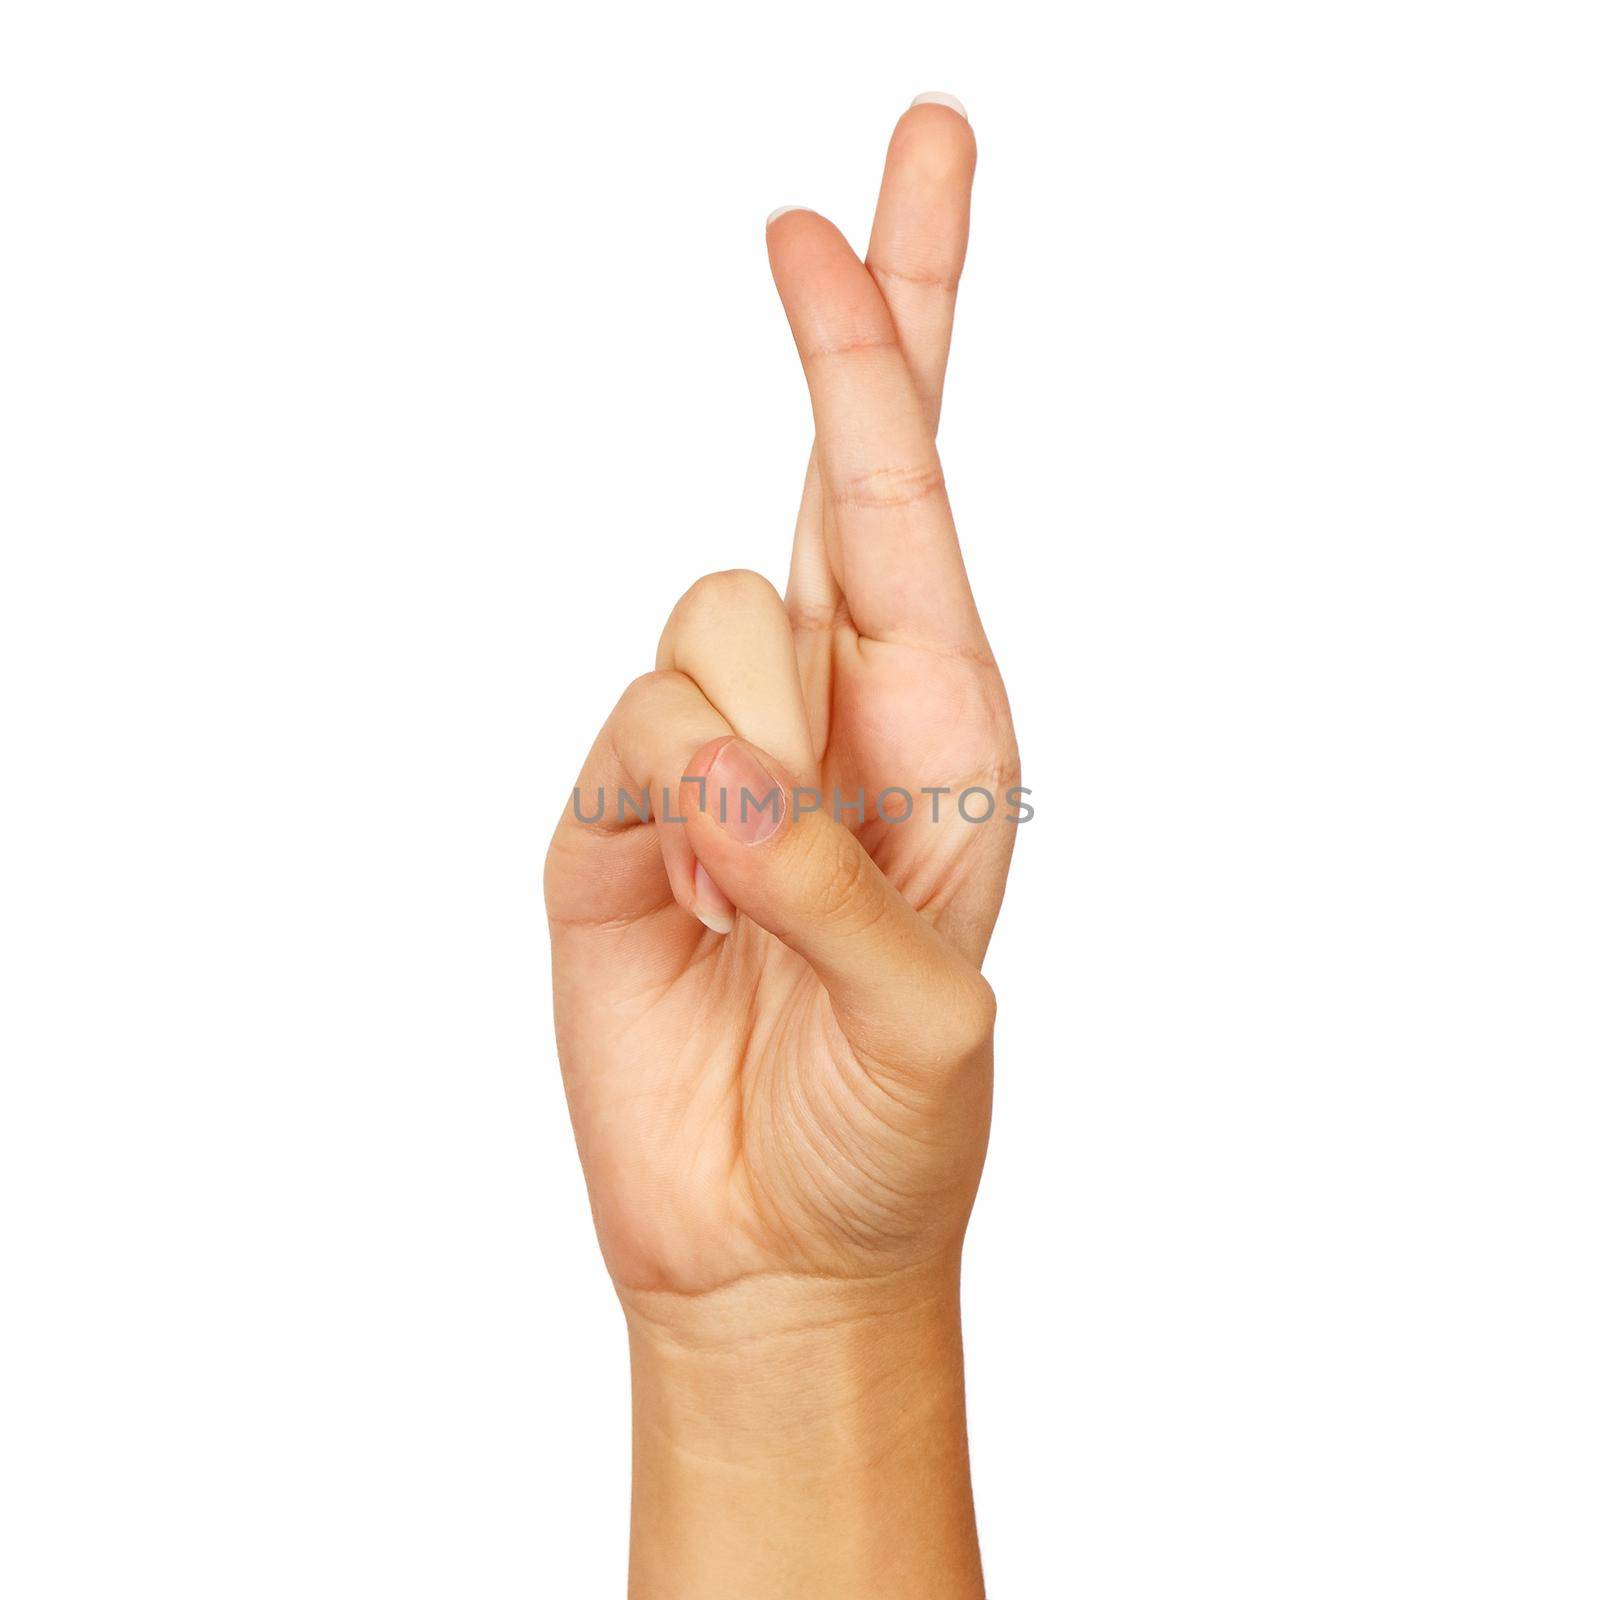 american sign language. female hand showing letter r by raddnatt